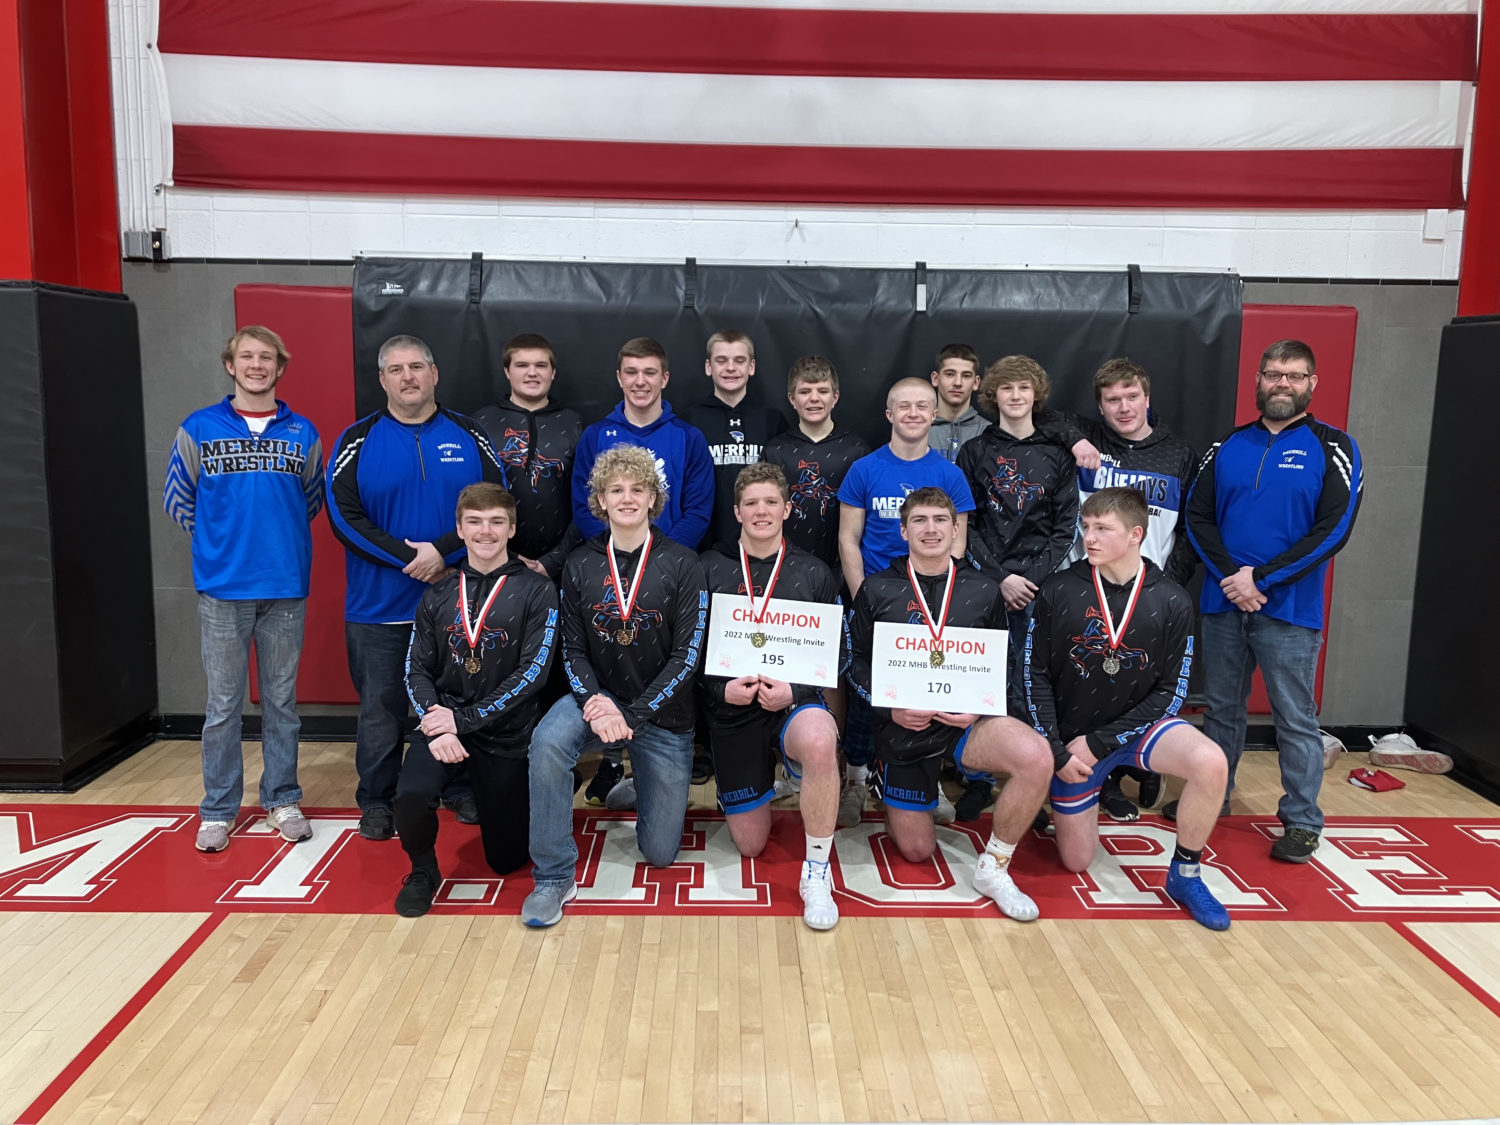 Merrill Wrestlers take 2nd place out of 15 teams at Mount Horeb